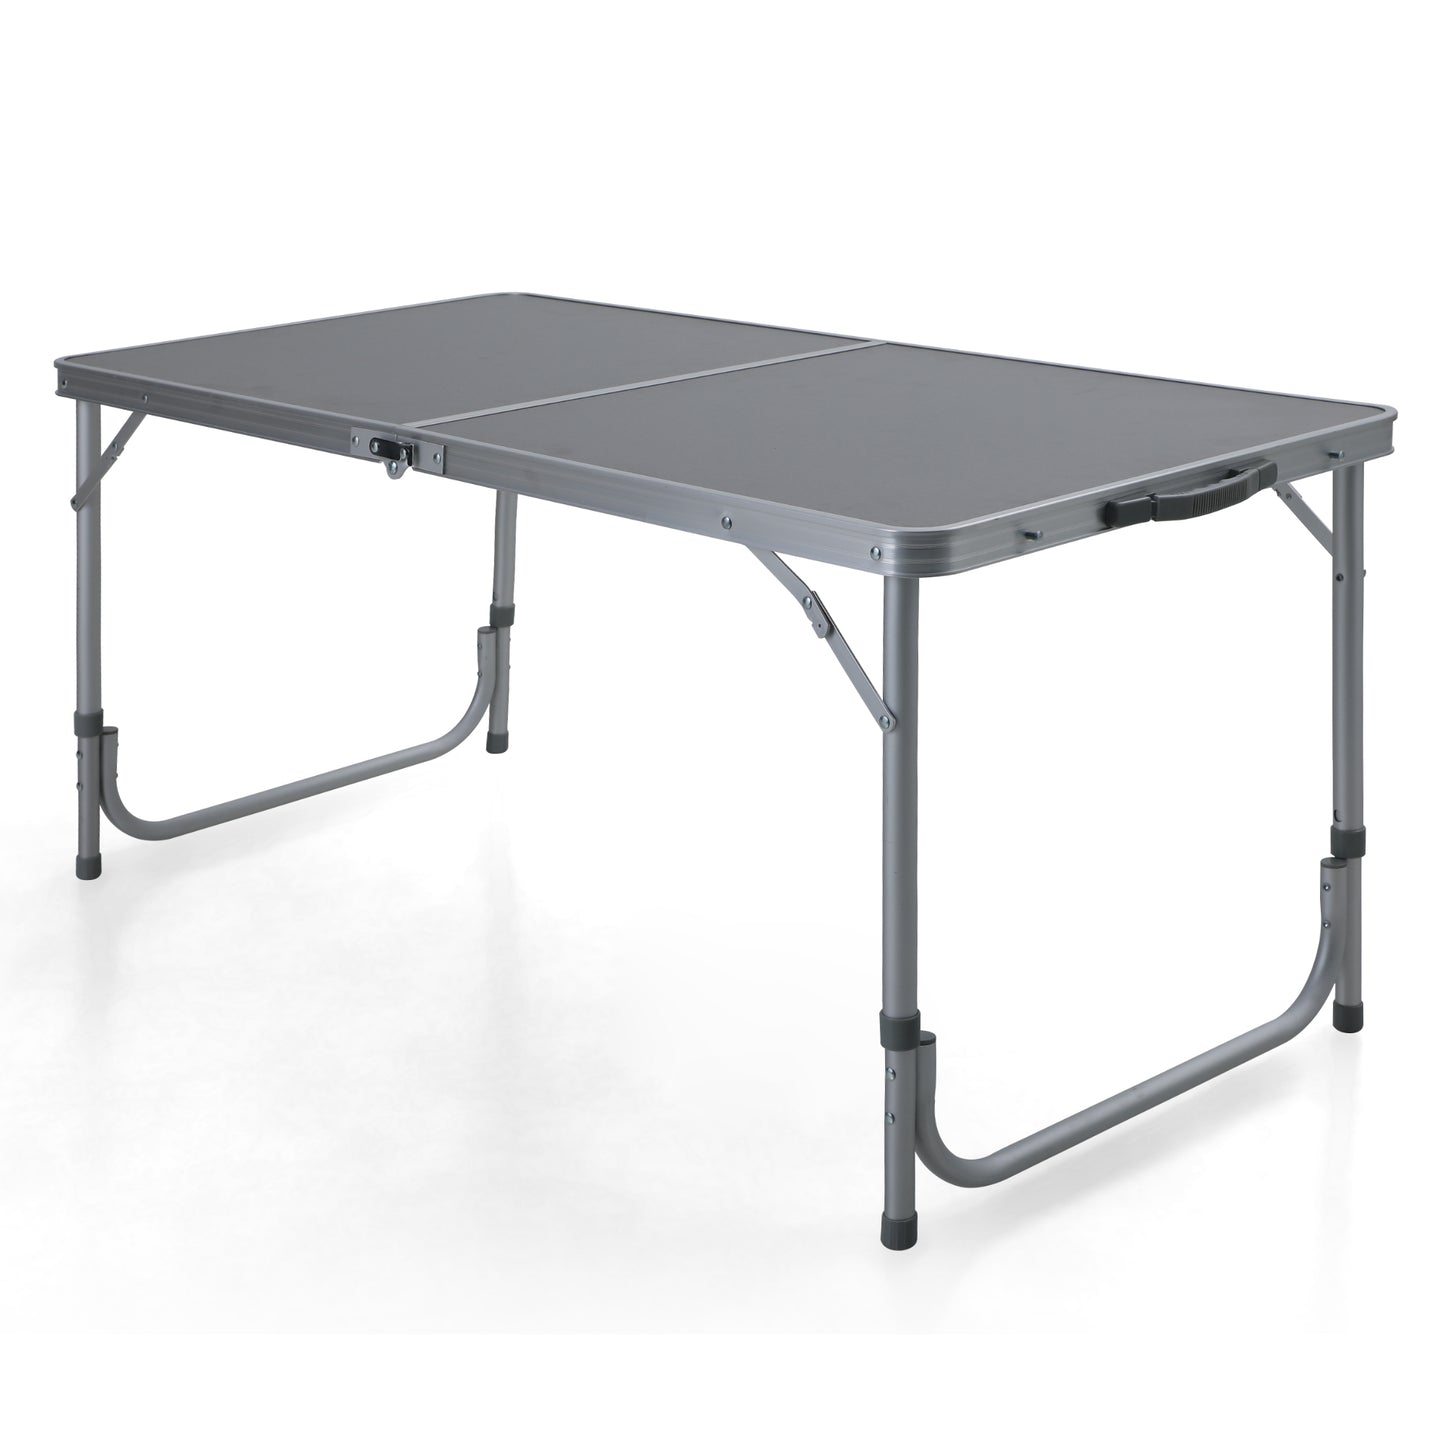 ALPHA CAMP 120cm Folding Camping Table Adjustable Height